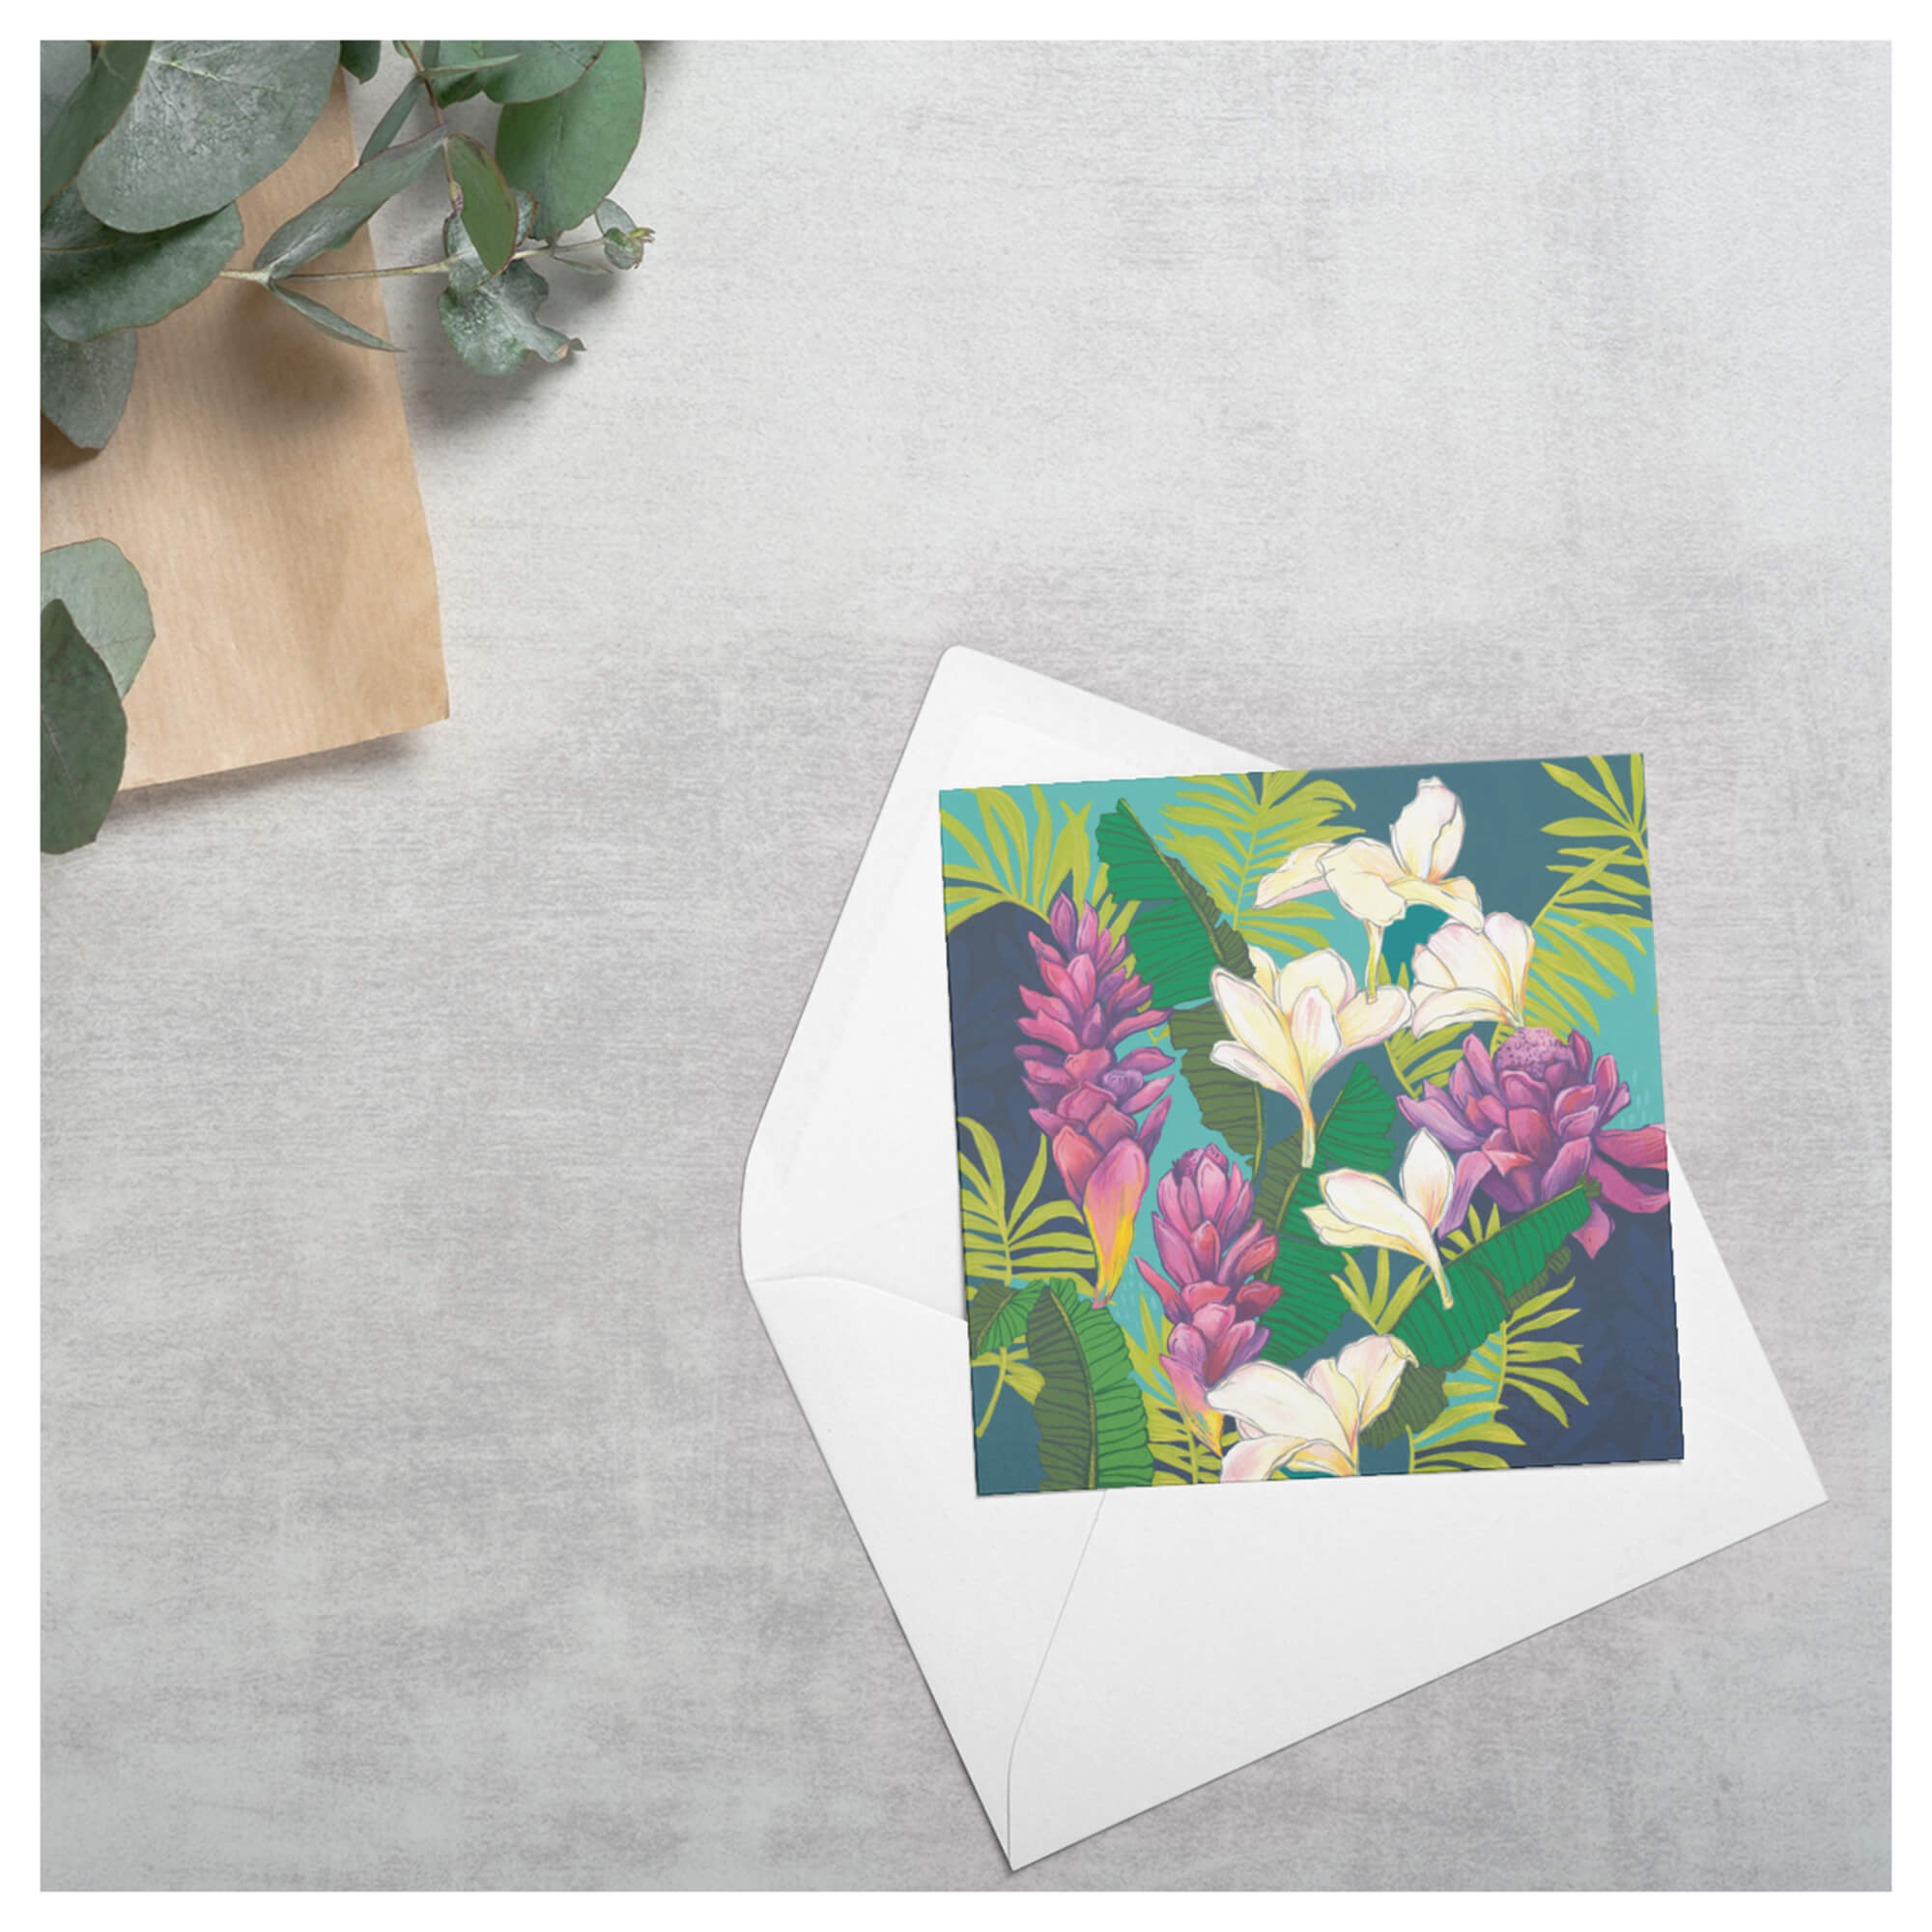 A greeting card that features vibrant purple-hued ginger flowers and white plumerias and various tropical leaves by Hawaii artist Lauren Roth